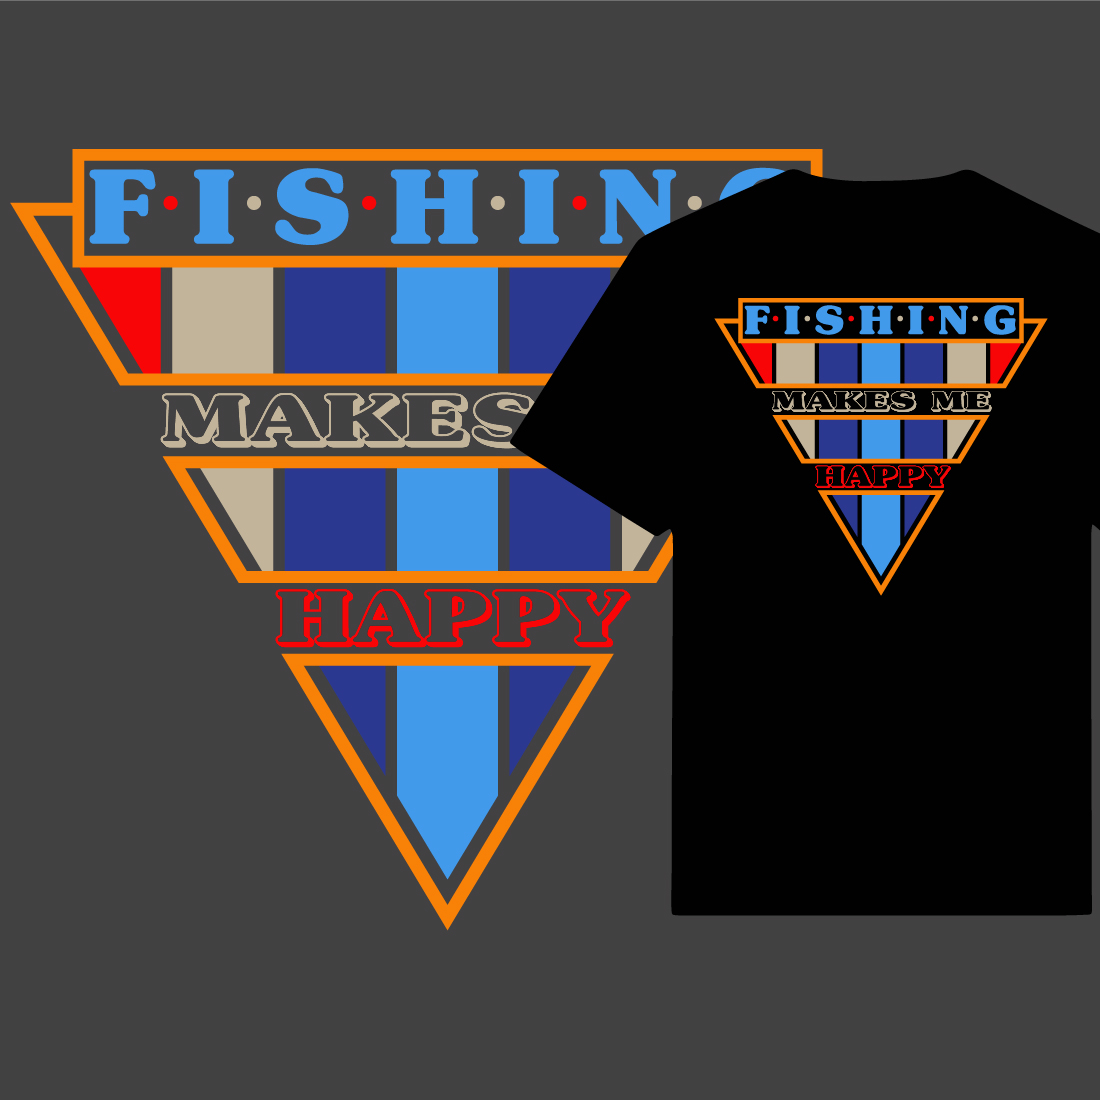 Fishing makes me happy typography t-shirt design preview image.